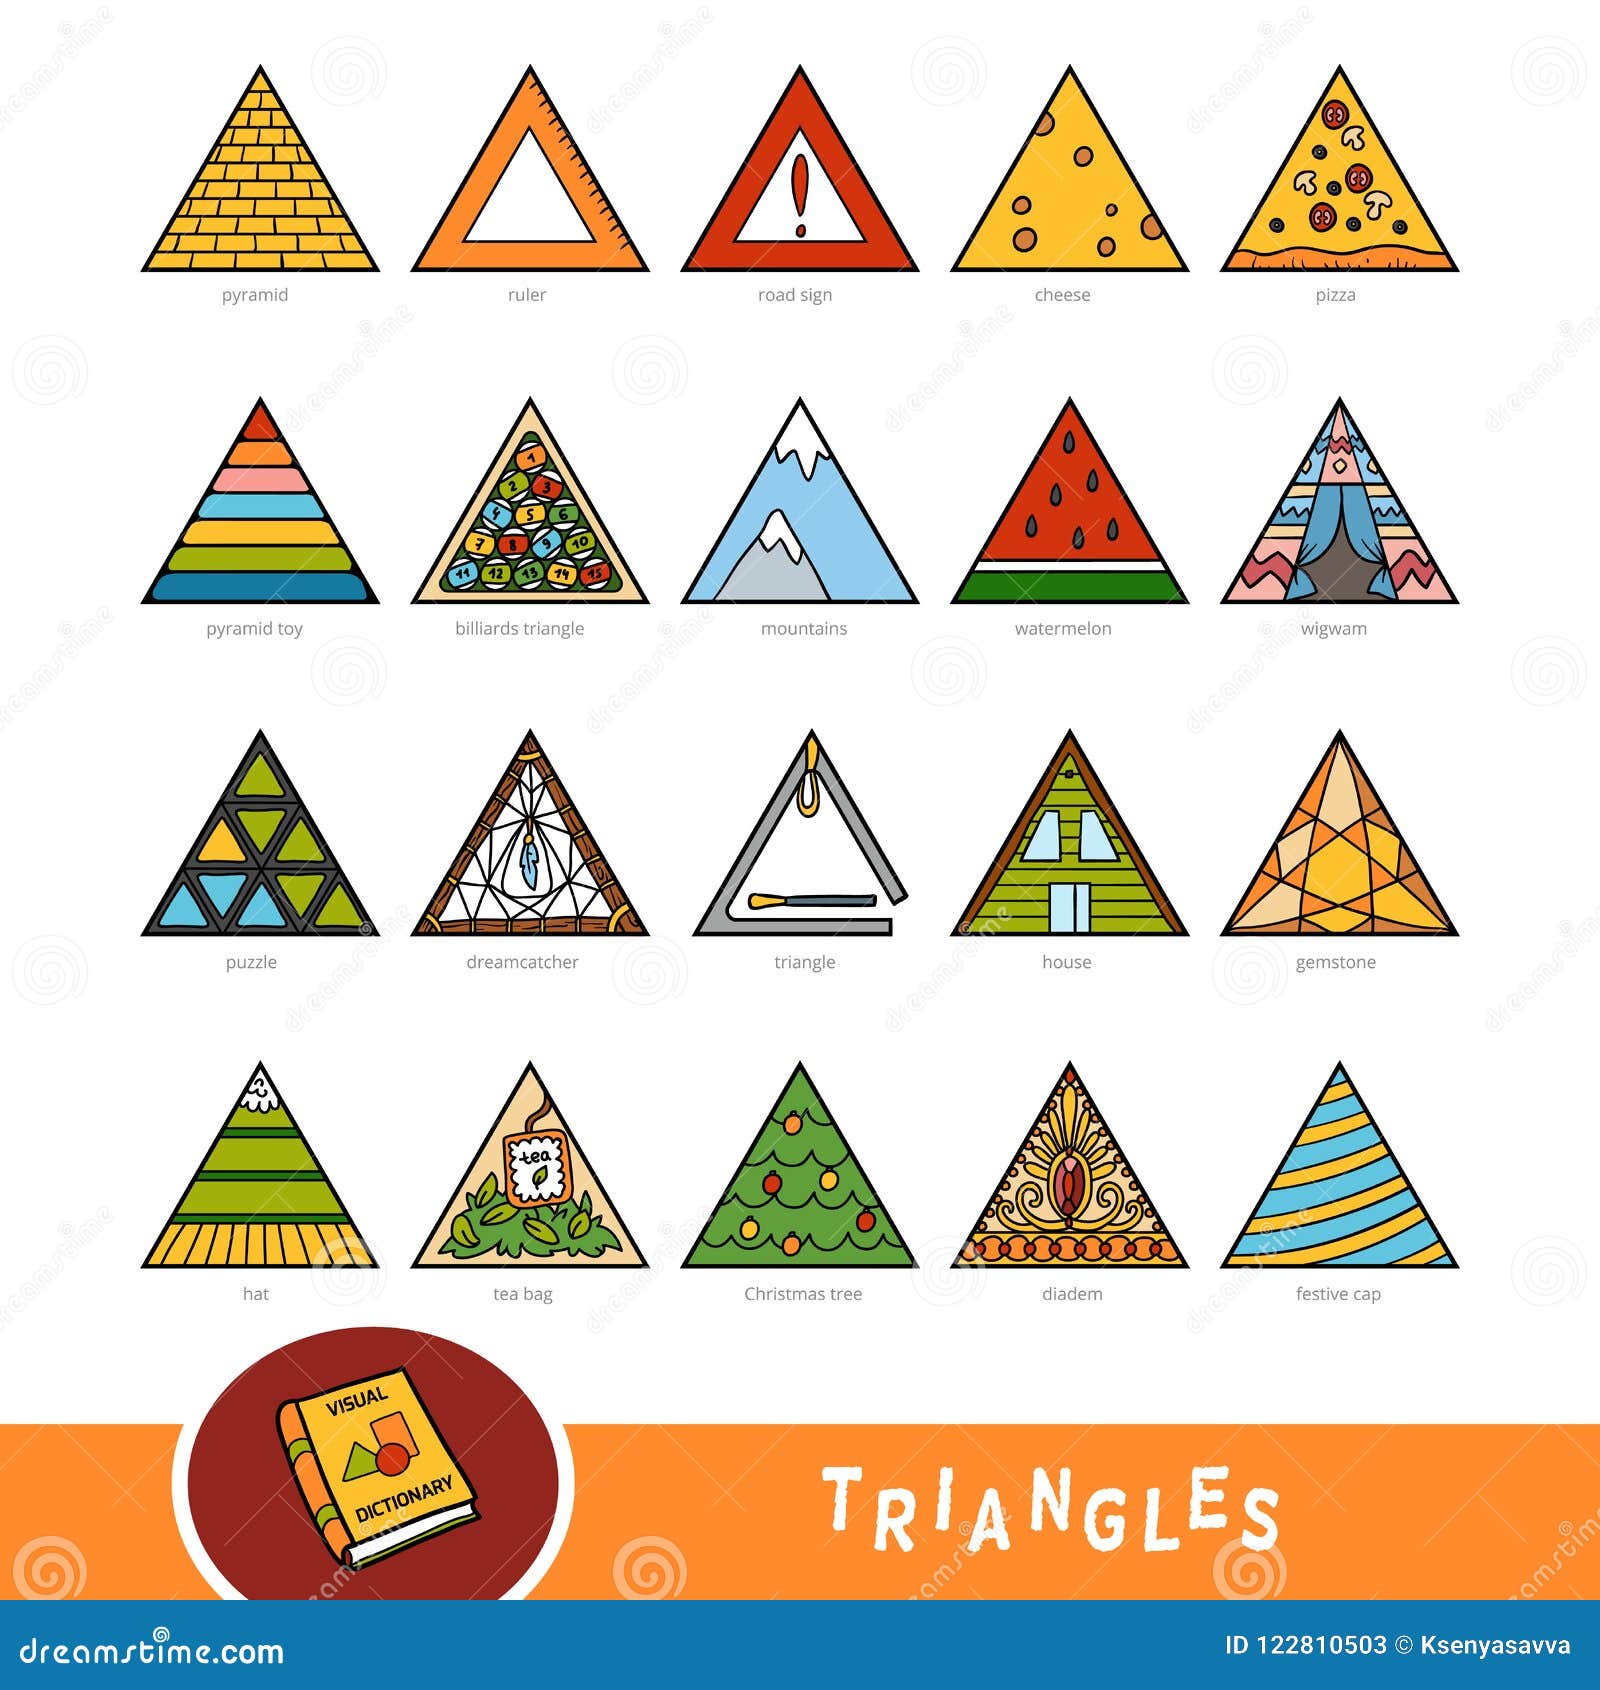 https://thumbs.dreamstime.com/z/colorful-set-triangle-shape-objects-visual-dictionary-children-geometric-shapes-education-set-studying-geometry-122810503.jpg